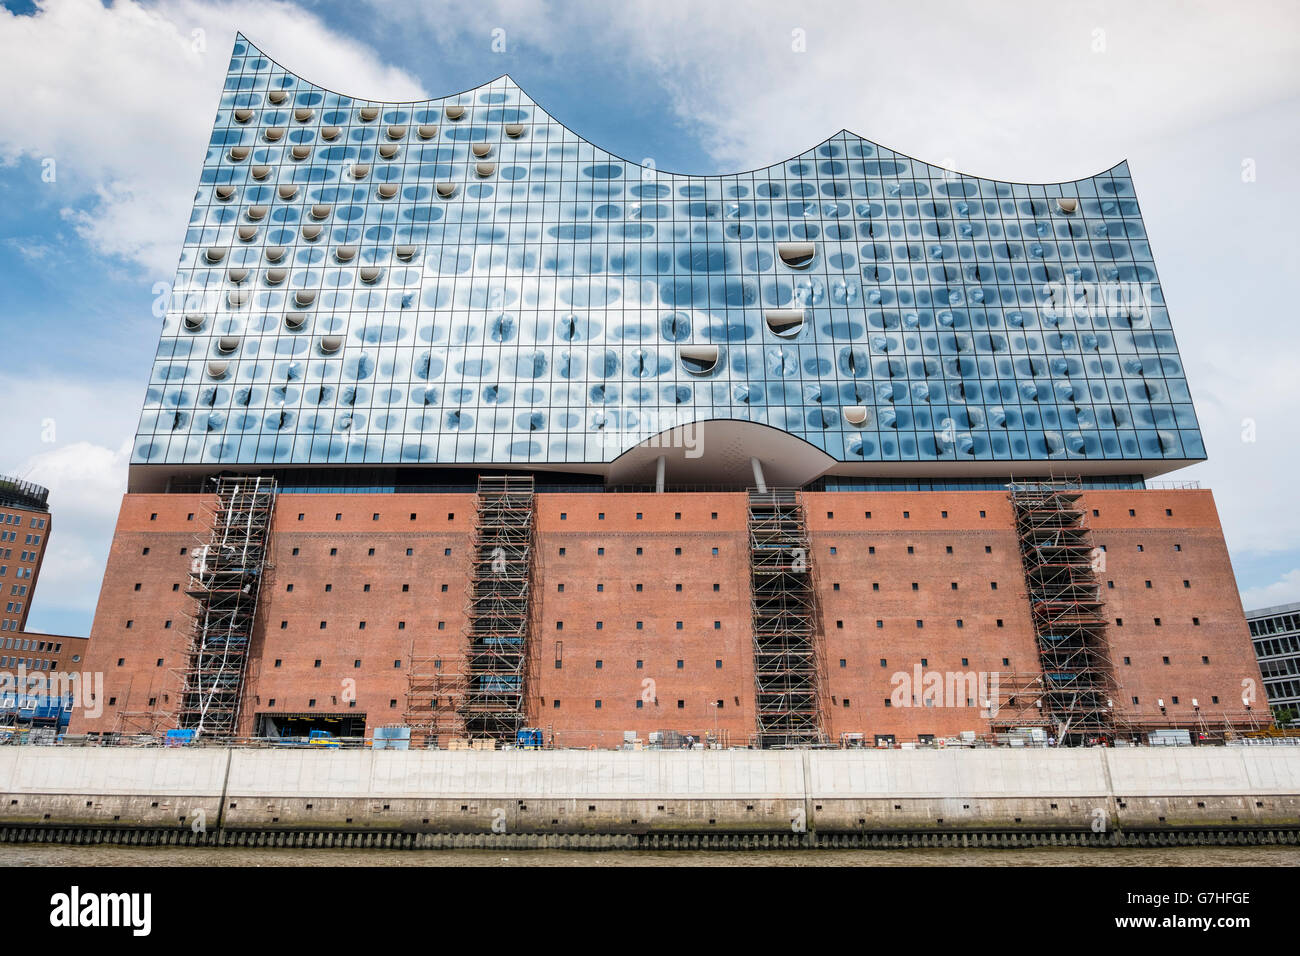 View of new Elbphilharmonie concert hall nearing completion on River Elbe in Hamburg Germany Stock Photo